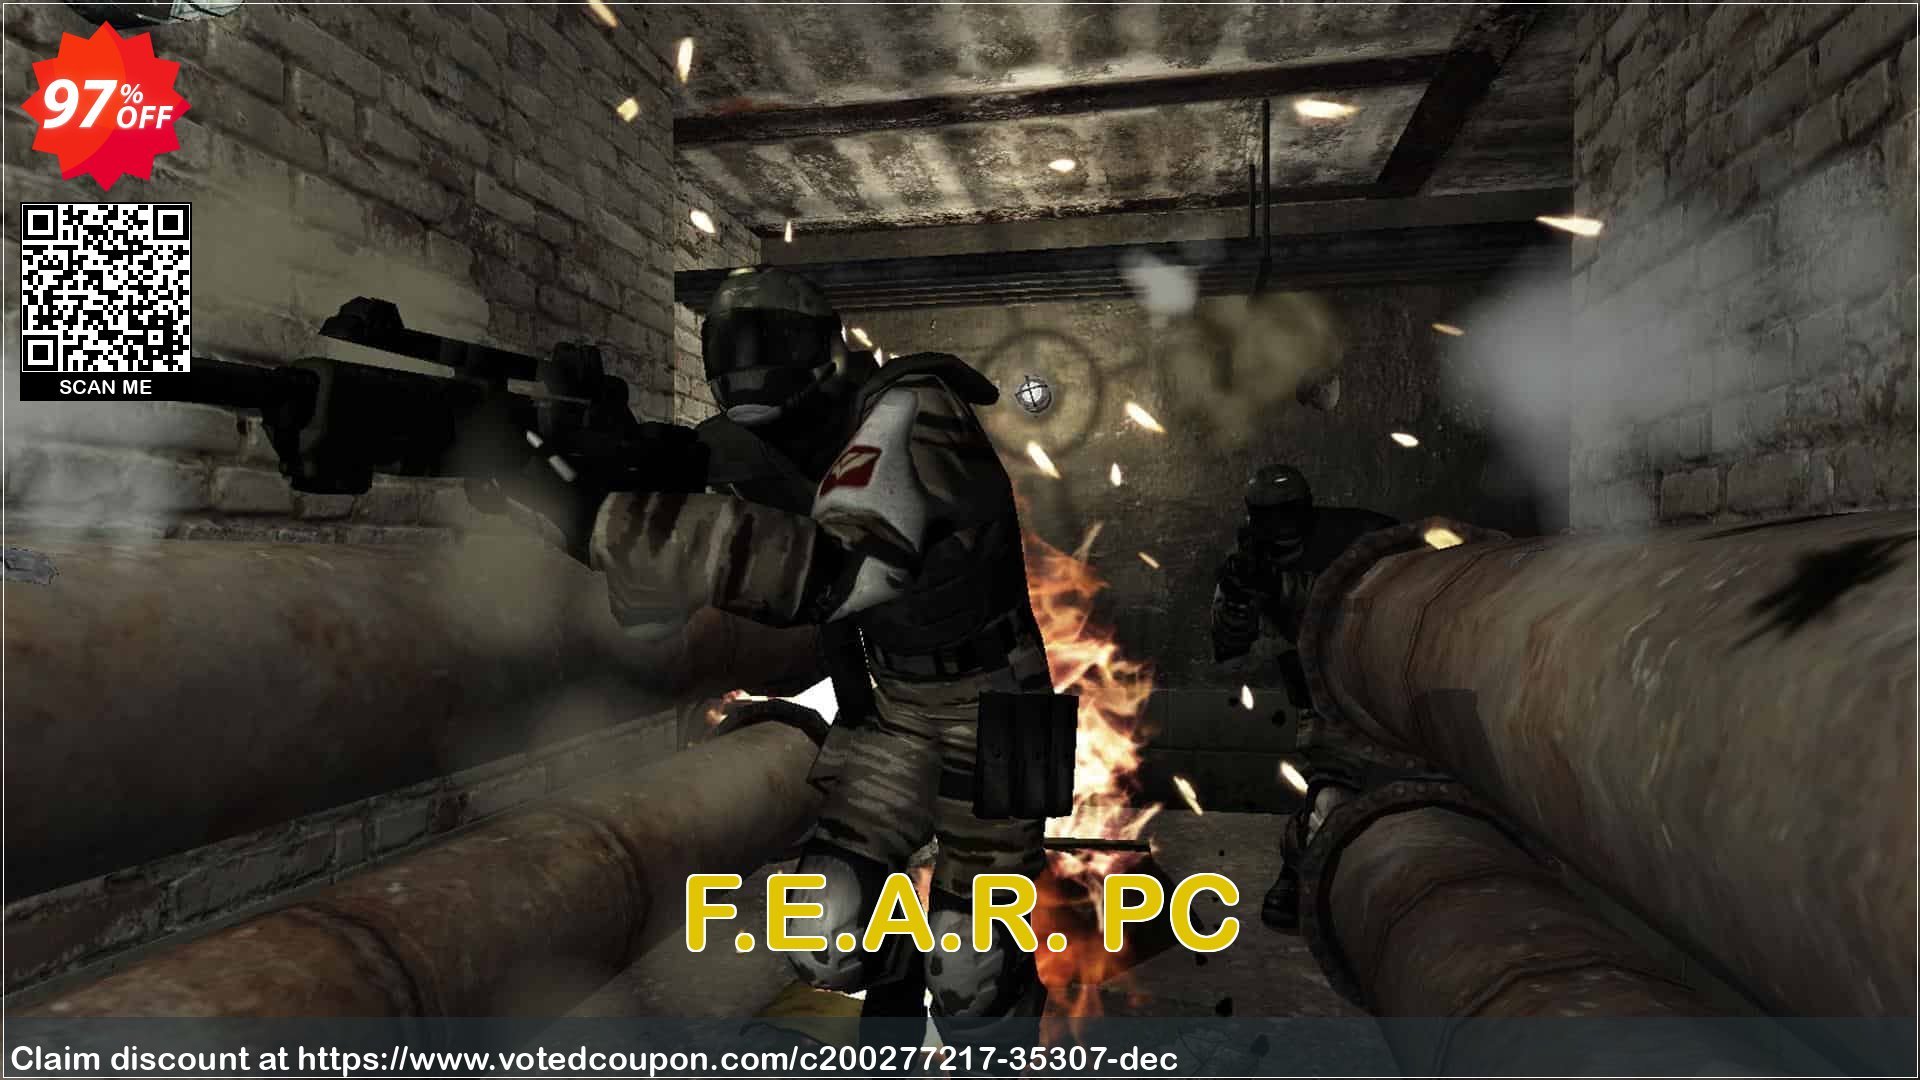 F.E.A.R. PC Coupon Code May 2024, 97% OFF - VotedCoupon